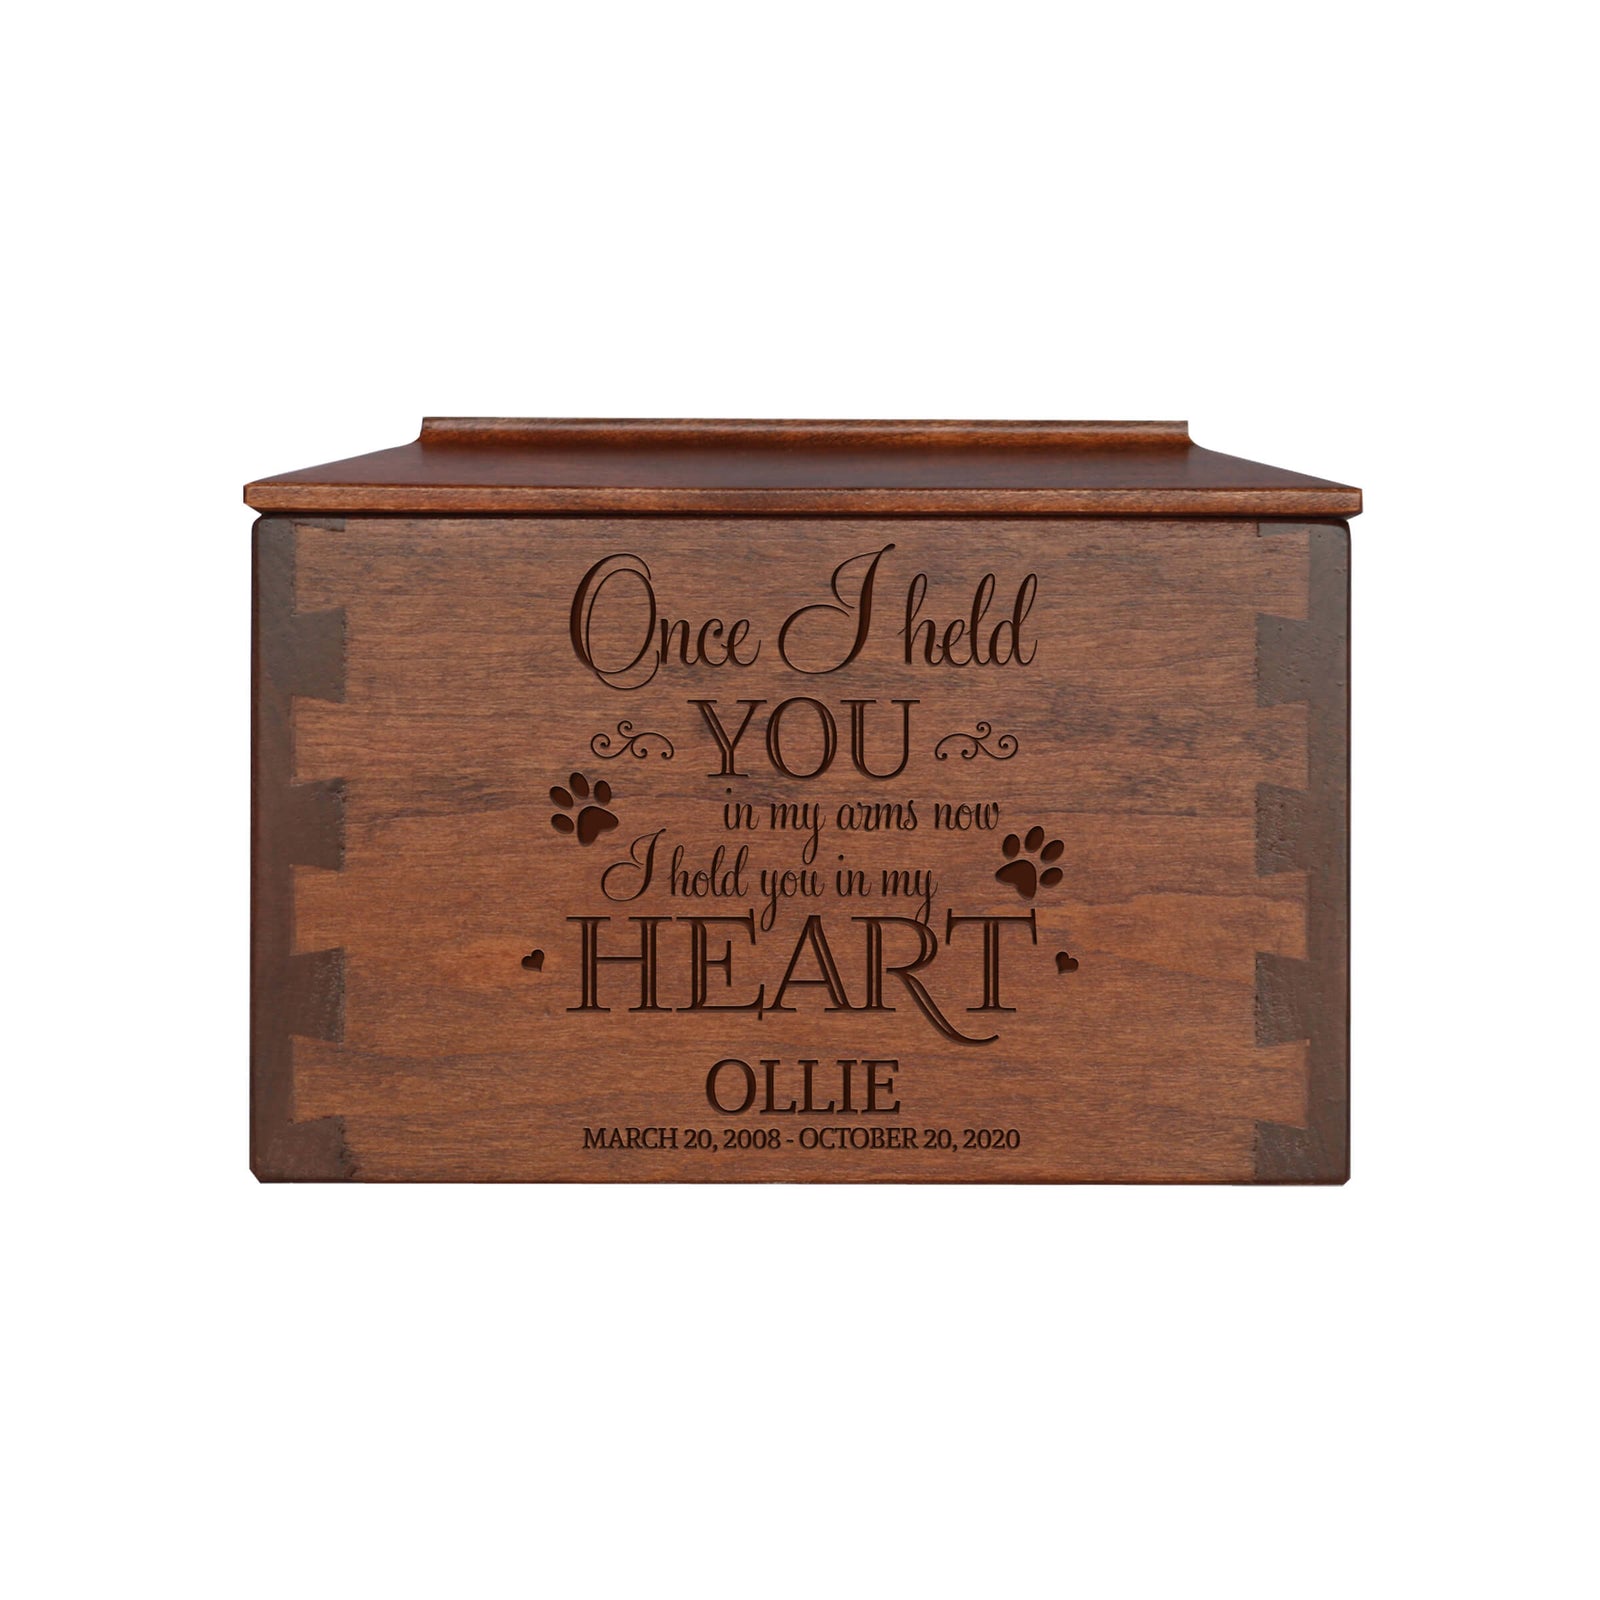 Pet Memorial Dovetail Cremation Urn Box for Dog or Cat - Once I Held You In My Arms